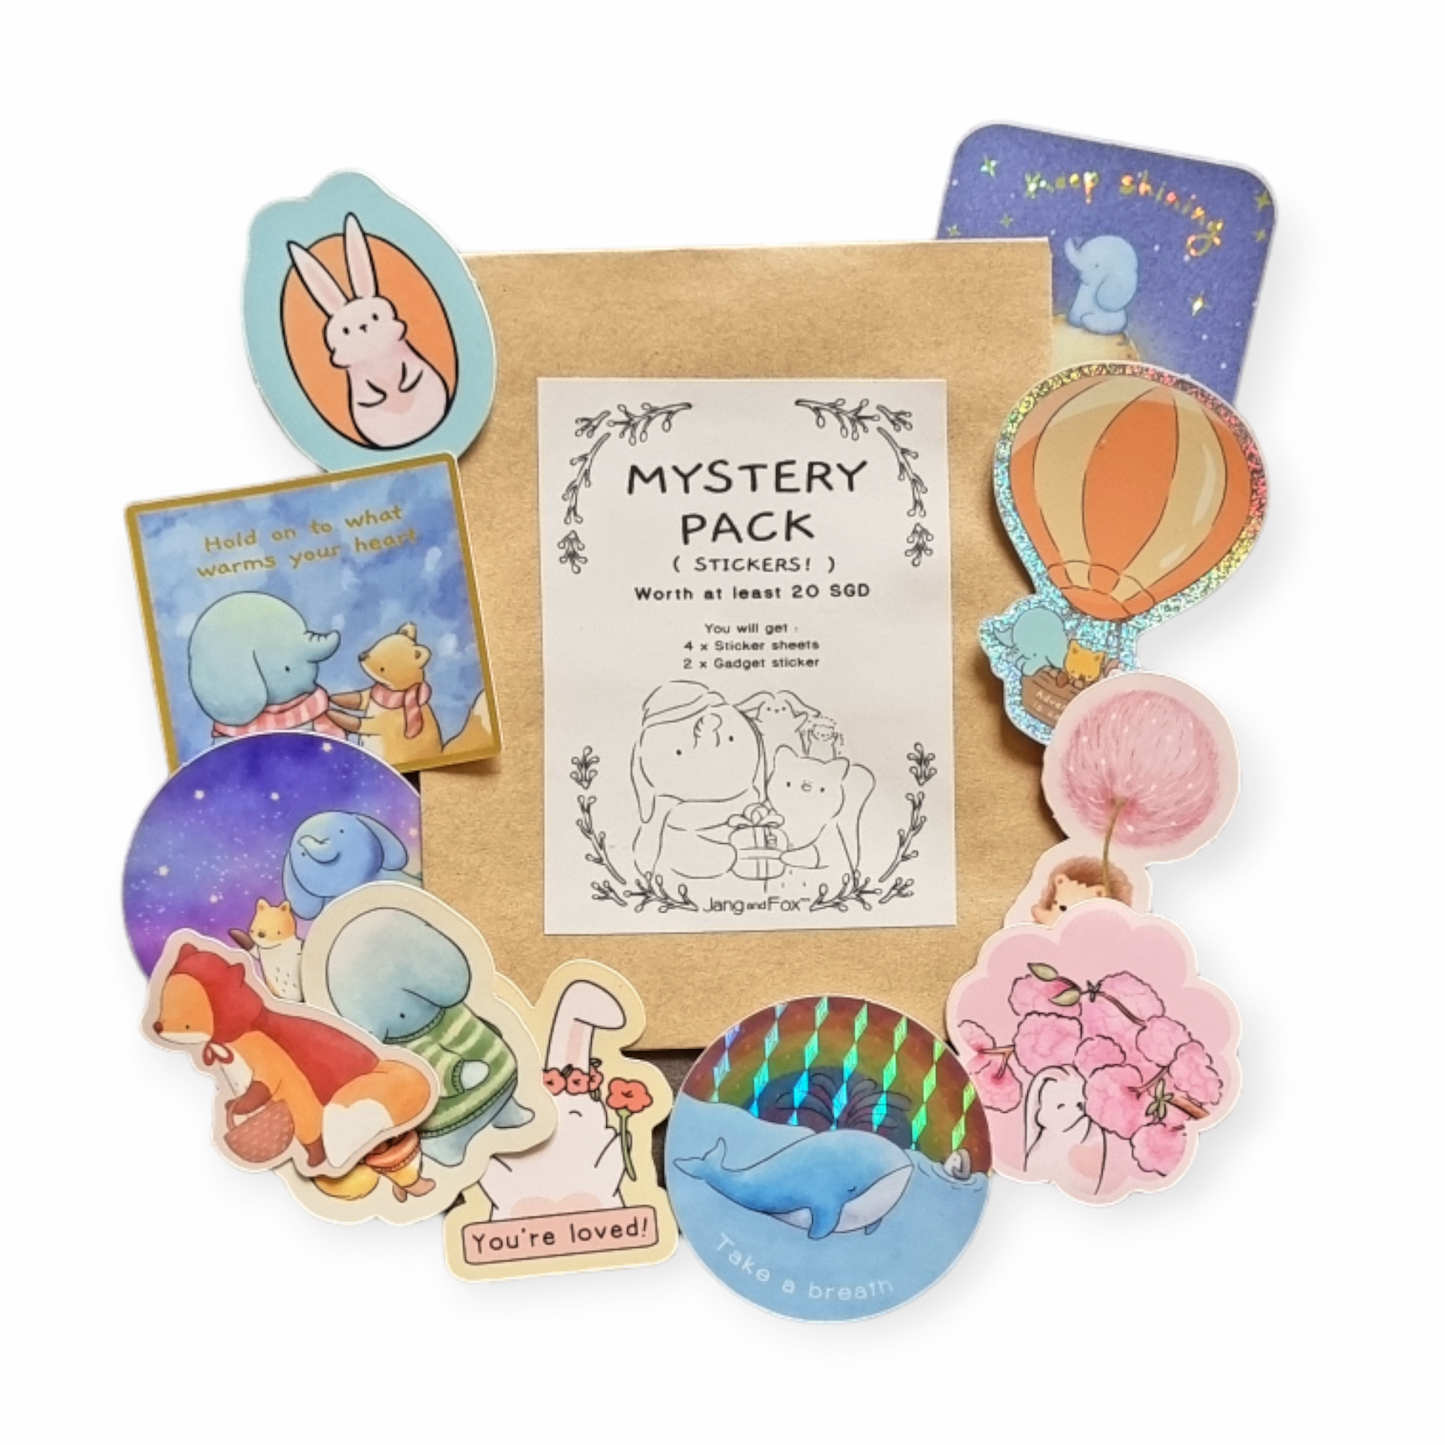 Mystery Pack (Stickers)